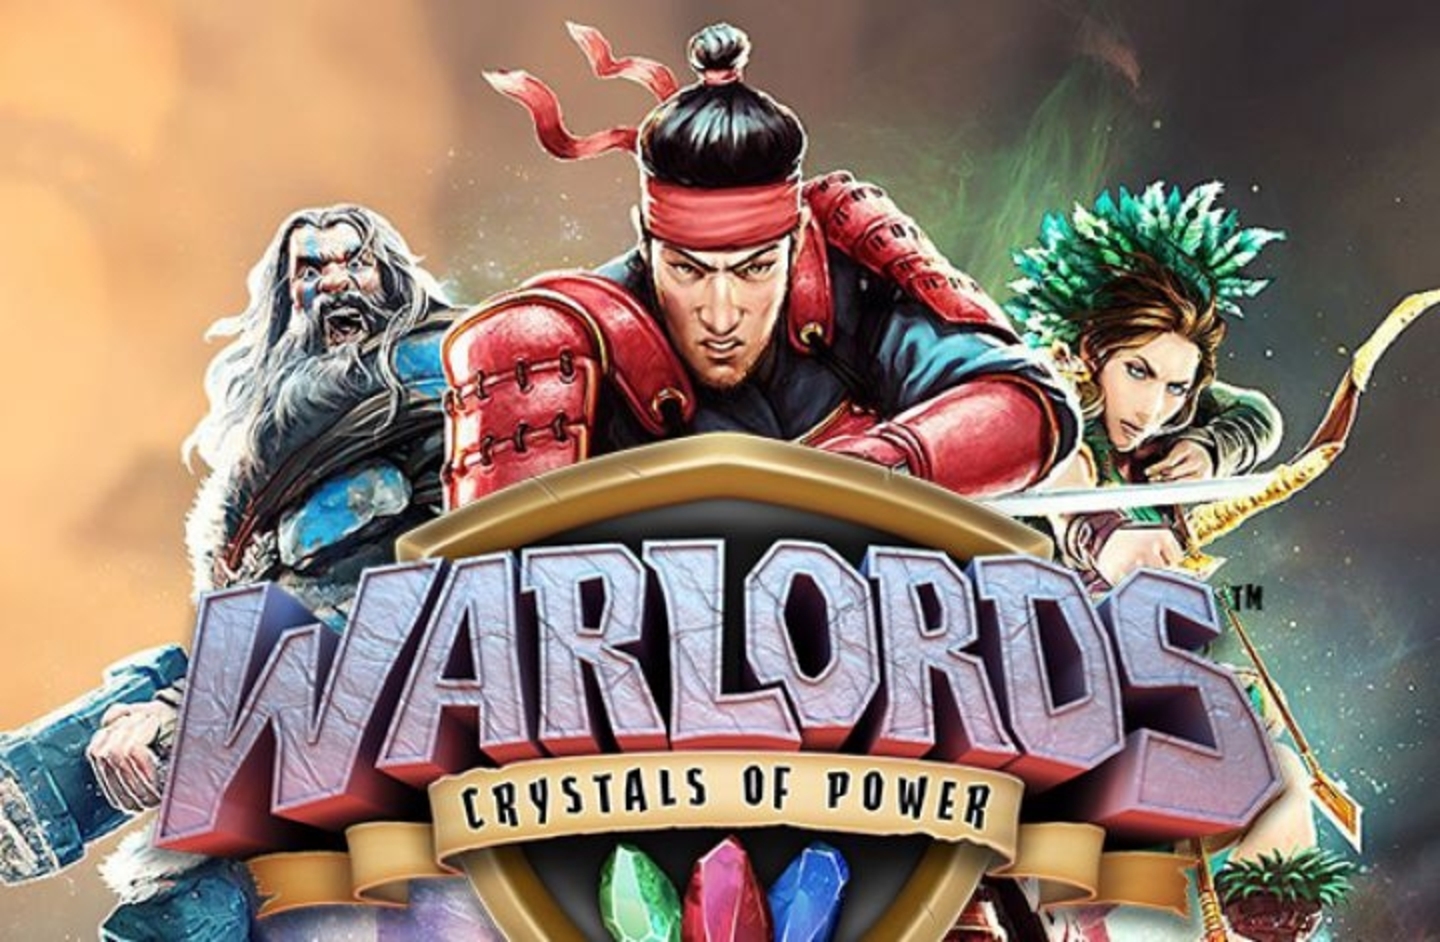 The Warlords: Crystals of Power Online Slot Demo Game by NetEnt